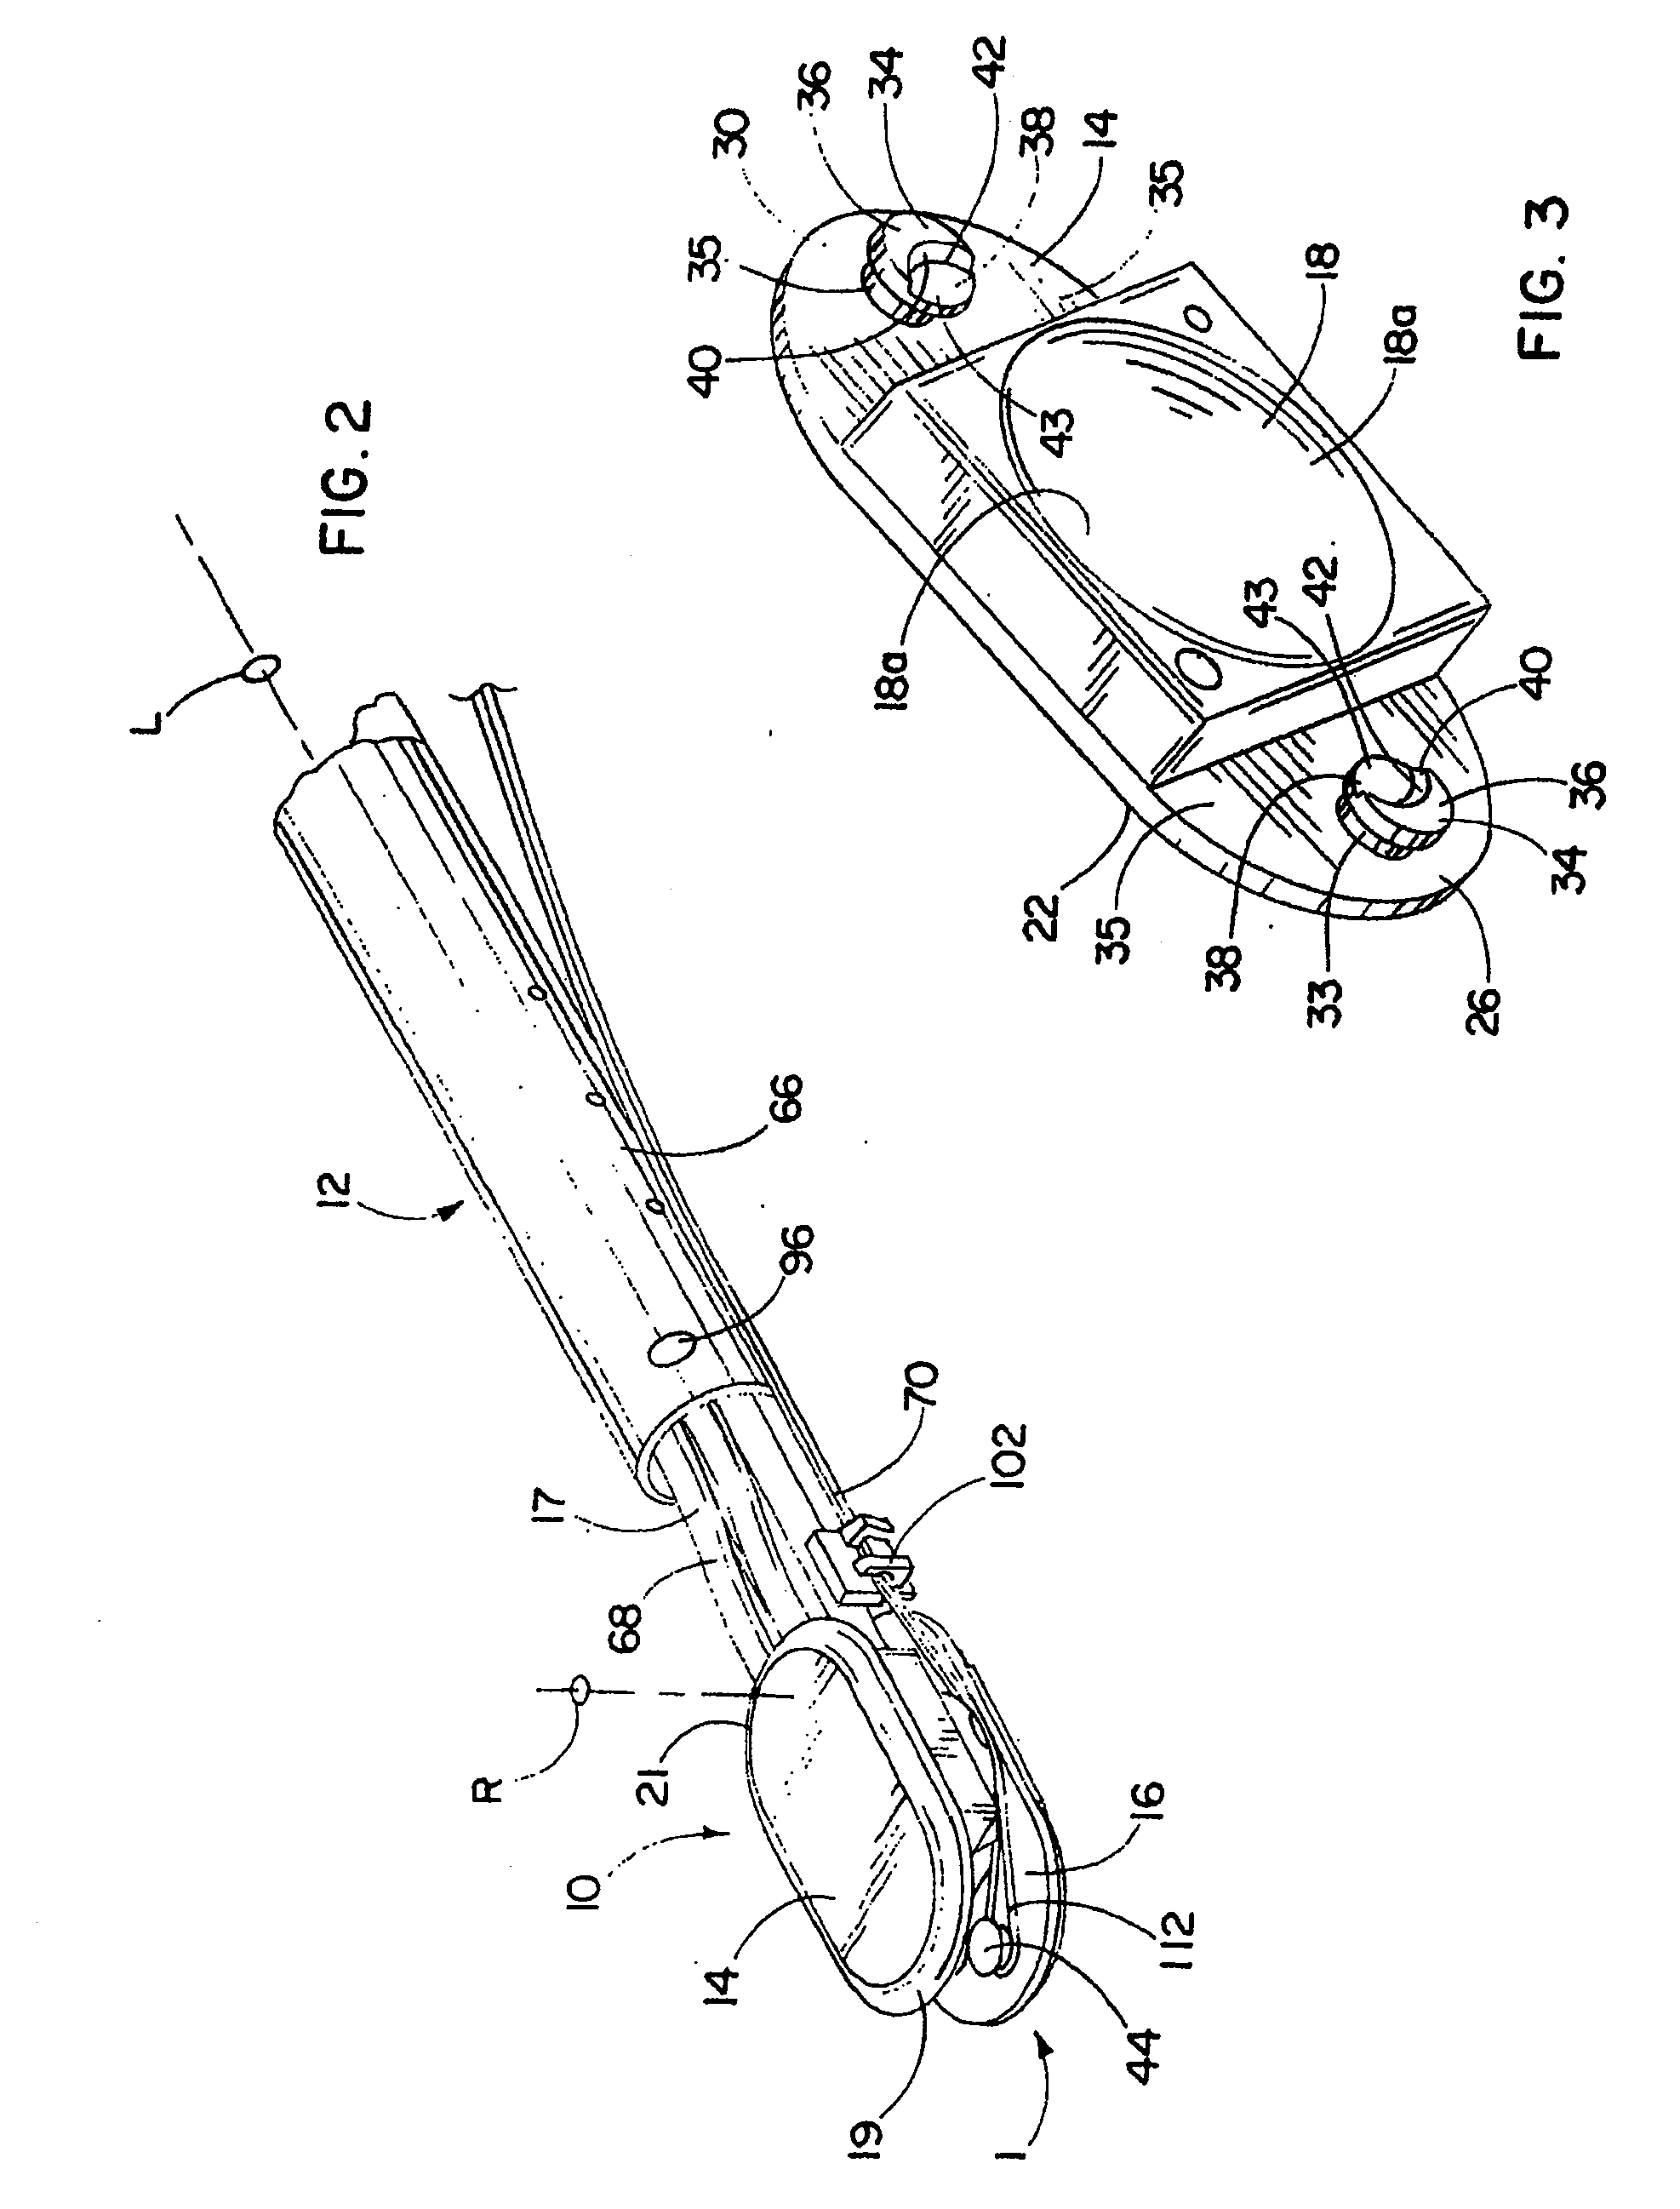 System and methods for inserting a spinal disc device into an intervertebral space